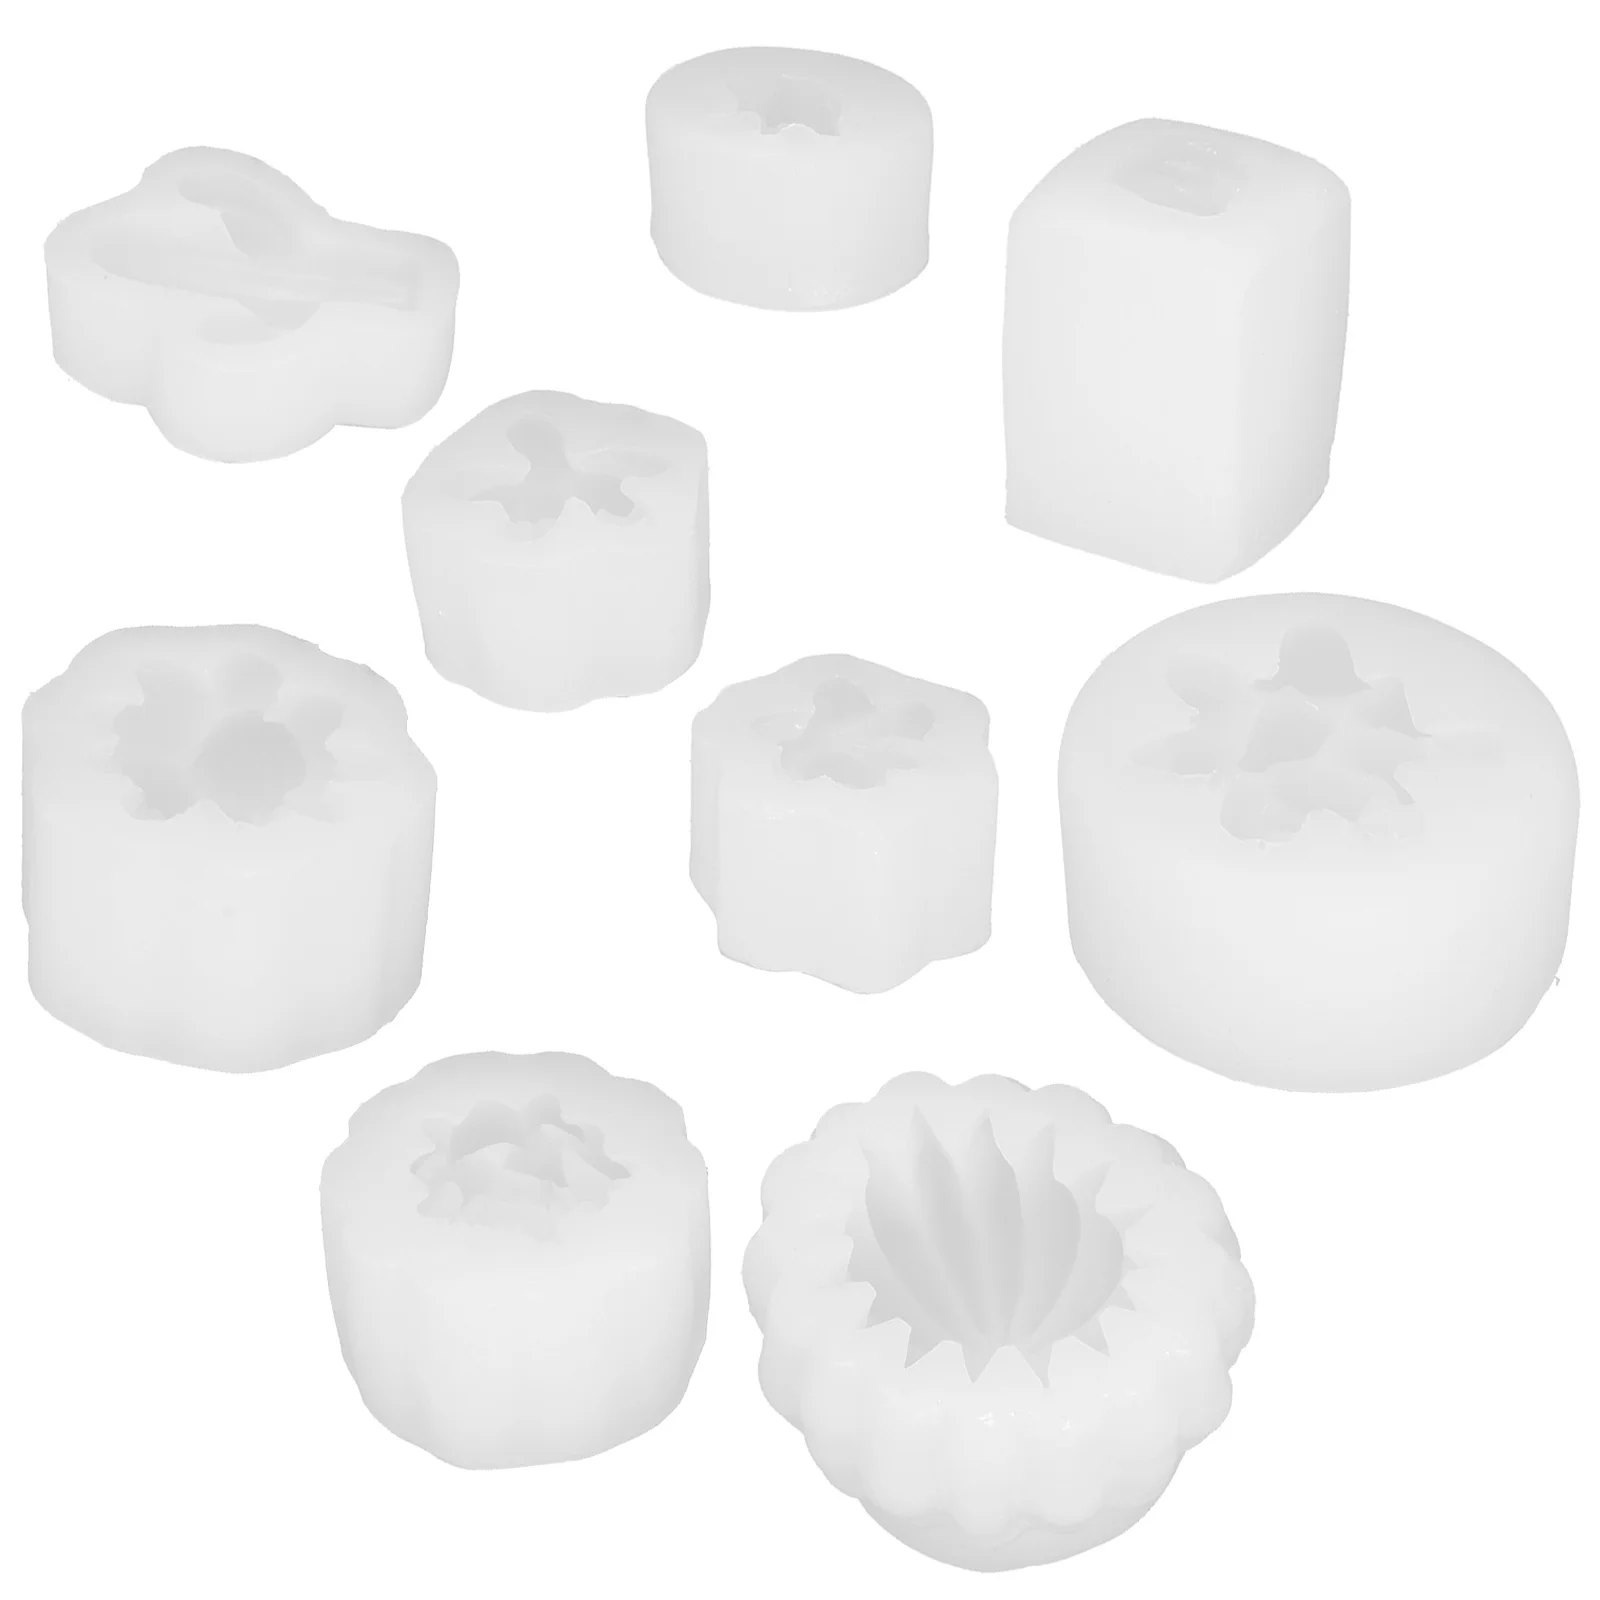 

9 Pcs Crafts Silicone Mold Cactus Shape Scented Mini DIY Handcrafting Molds Making Tools